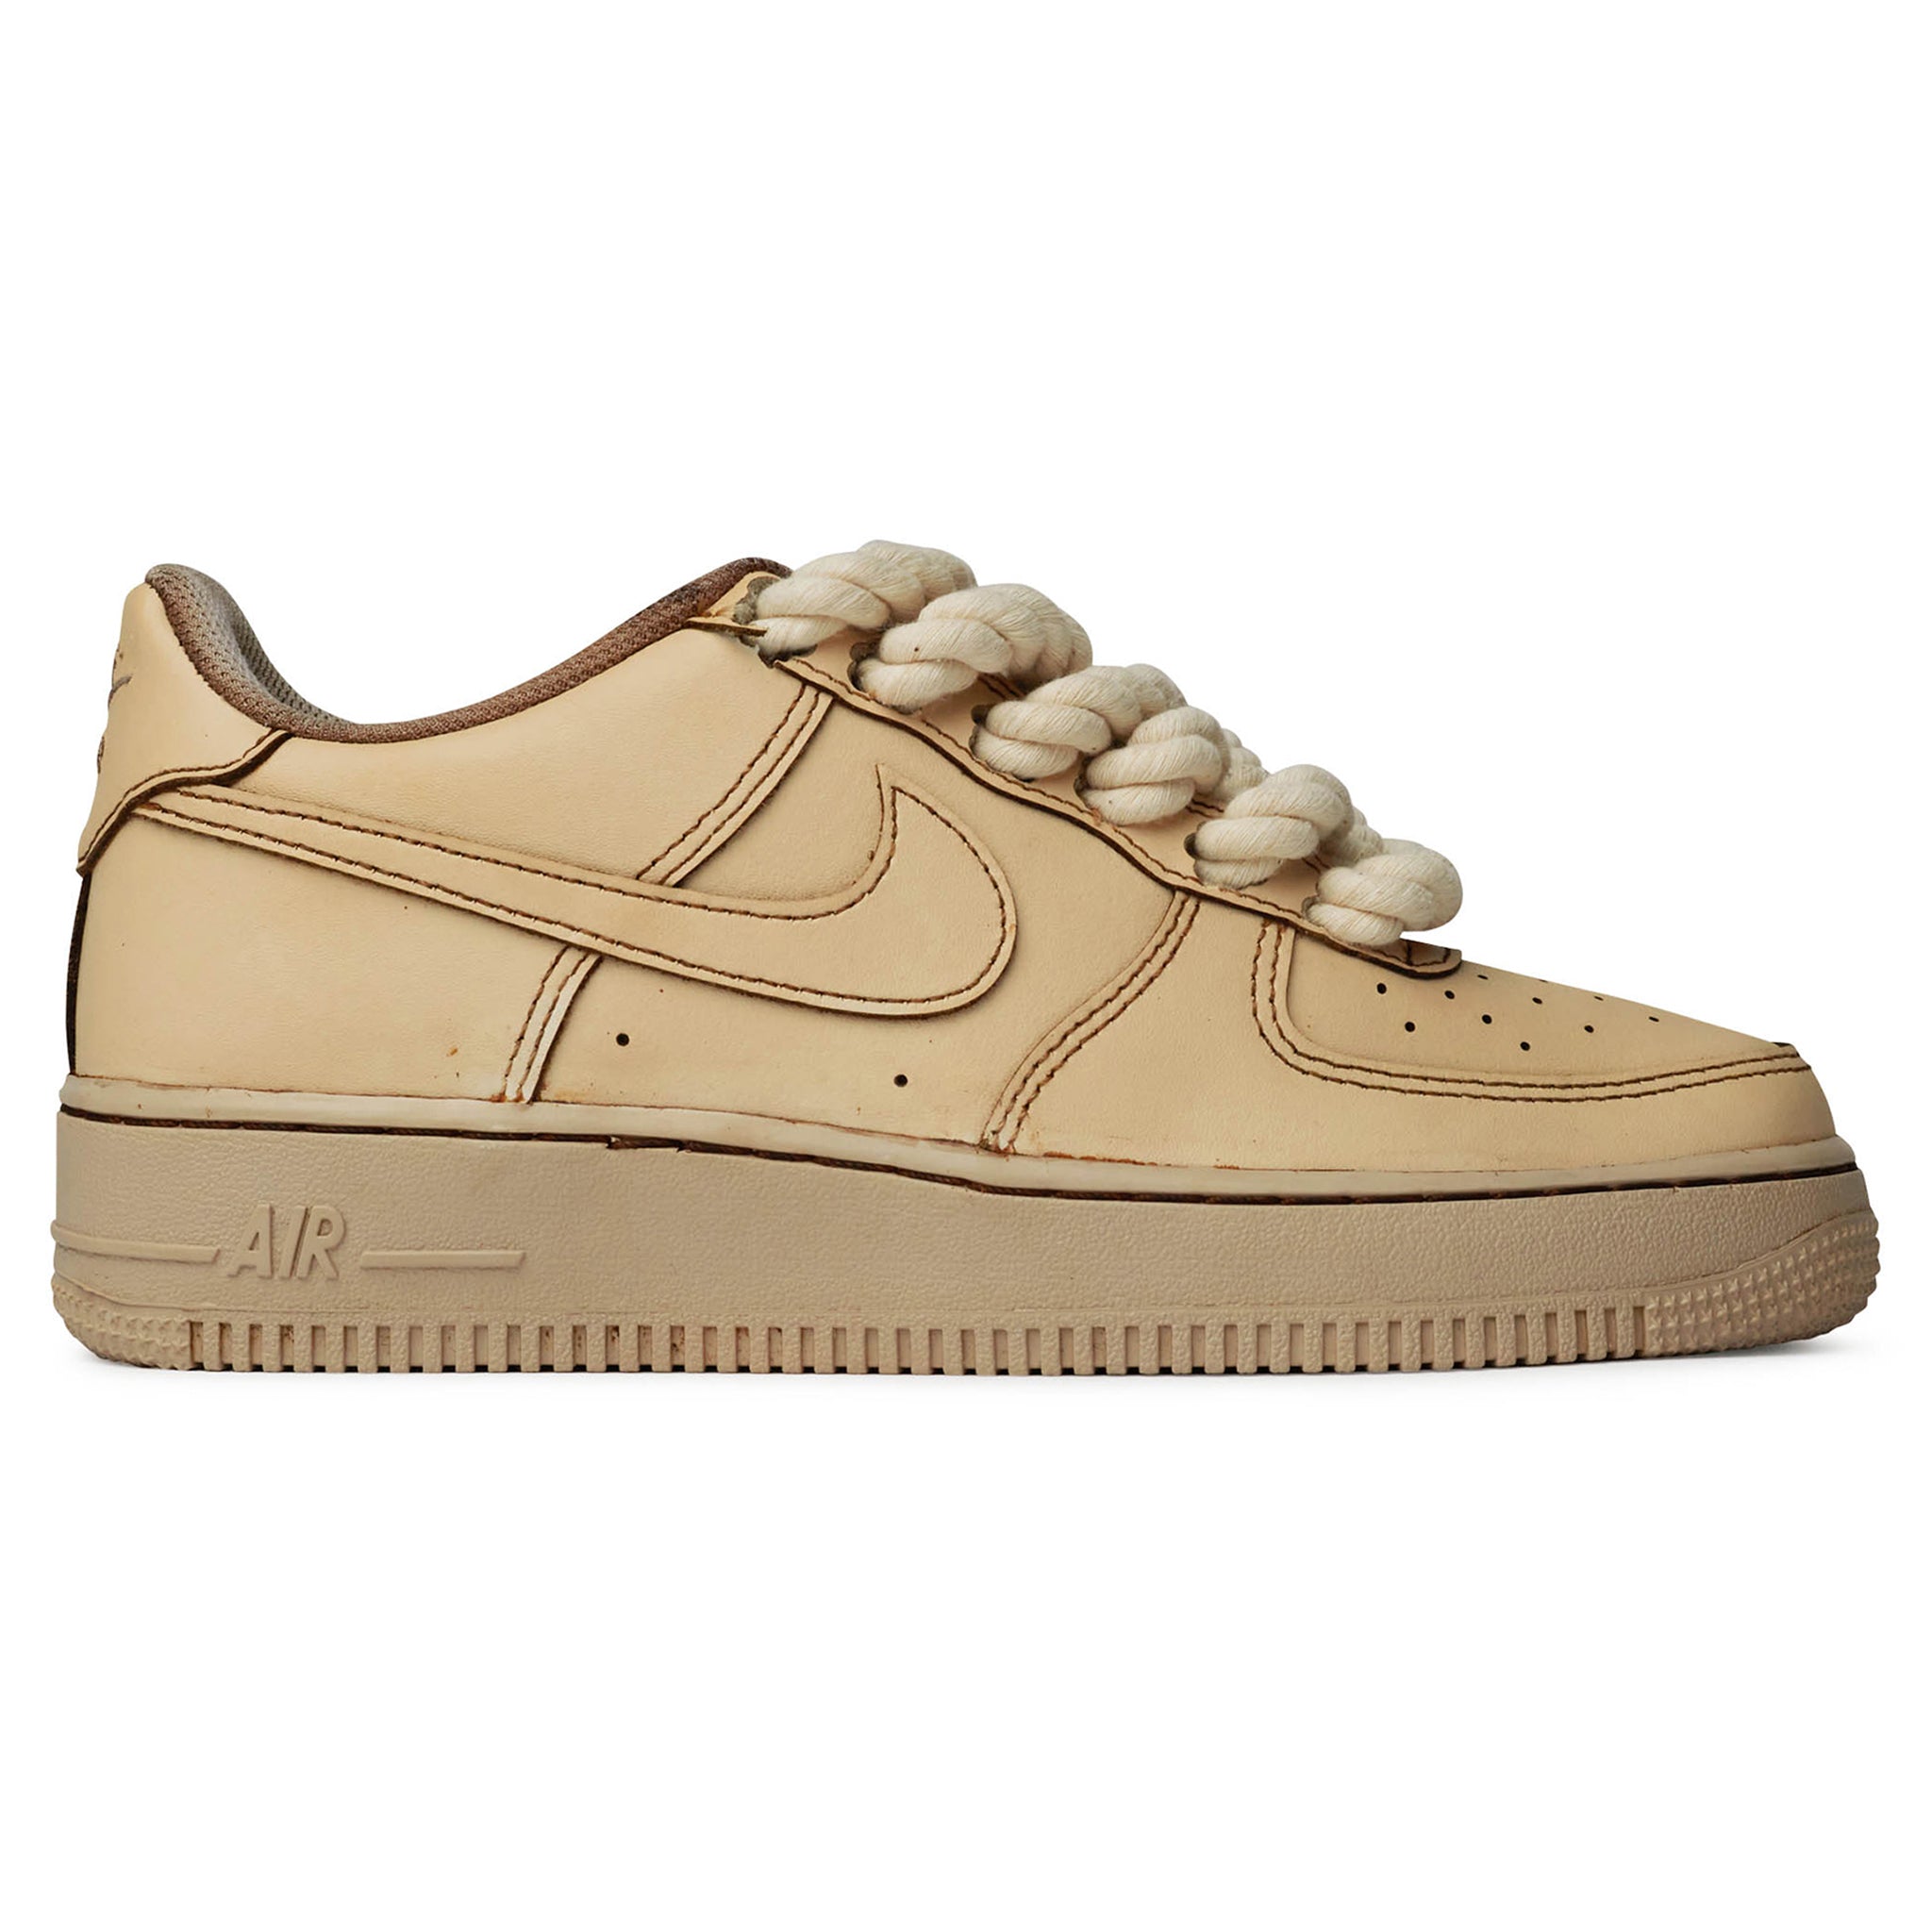 Side view of Nike Air Force 1 Low Rope Lace Coffee CW2288-111